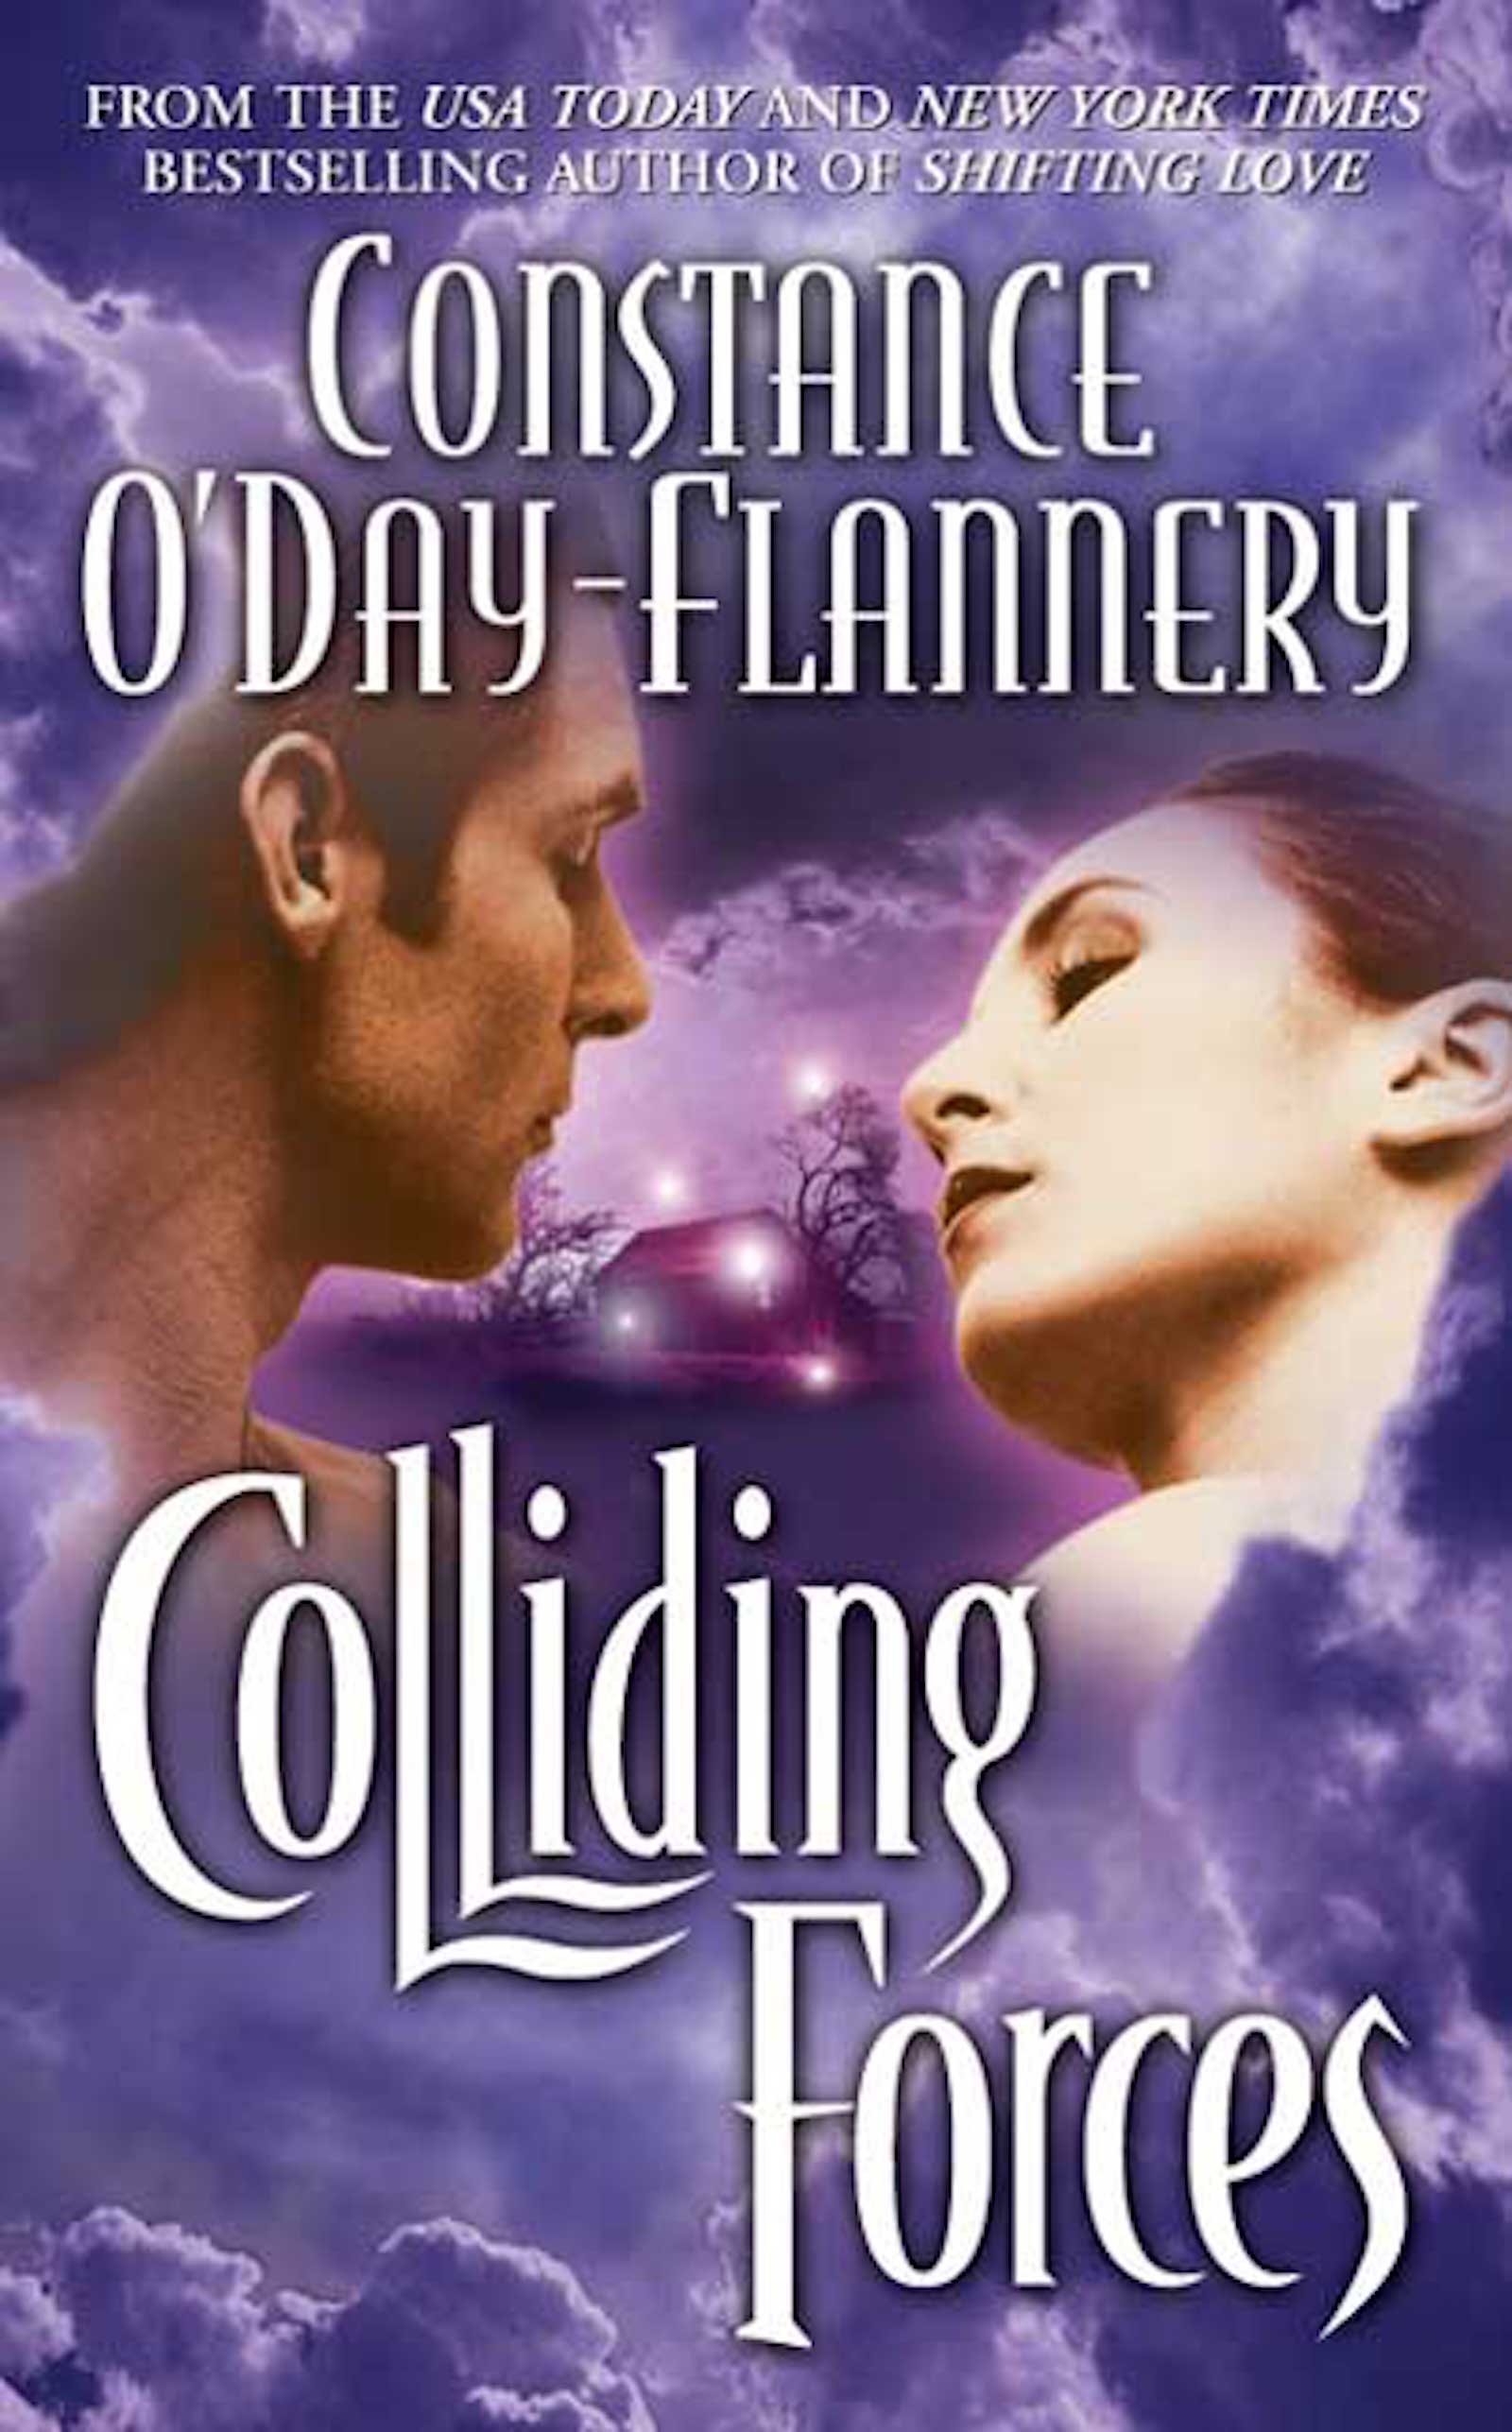 Colliding Forces by Constance O'Day Flannery